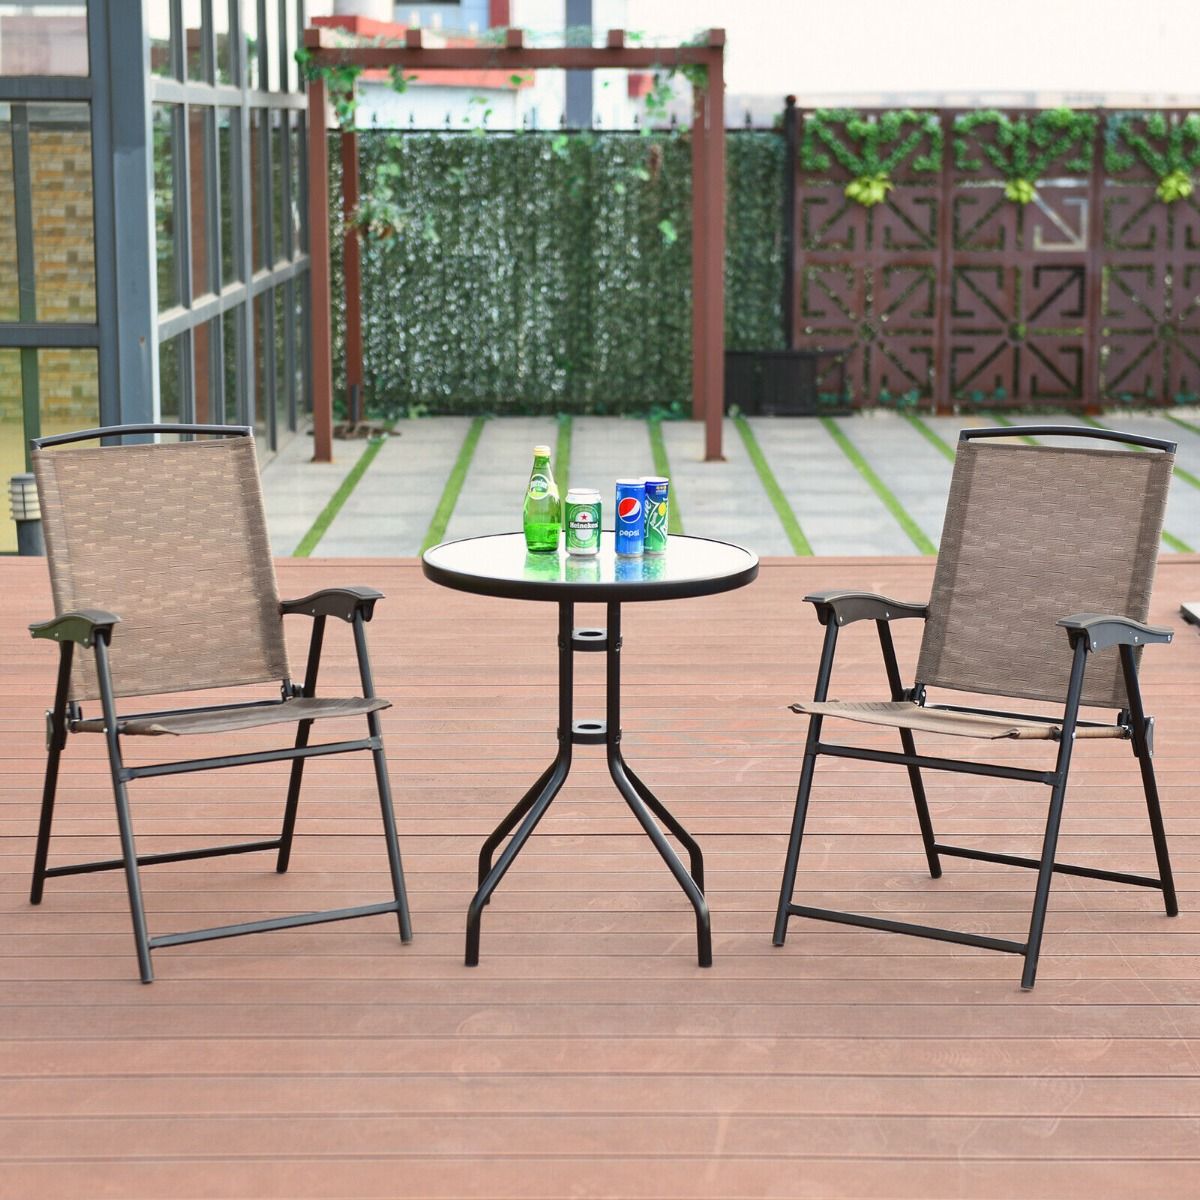 3 Piece Patio Bistro Set Round Table and 2 Folding Chairs for Home Yard Deck